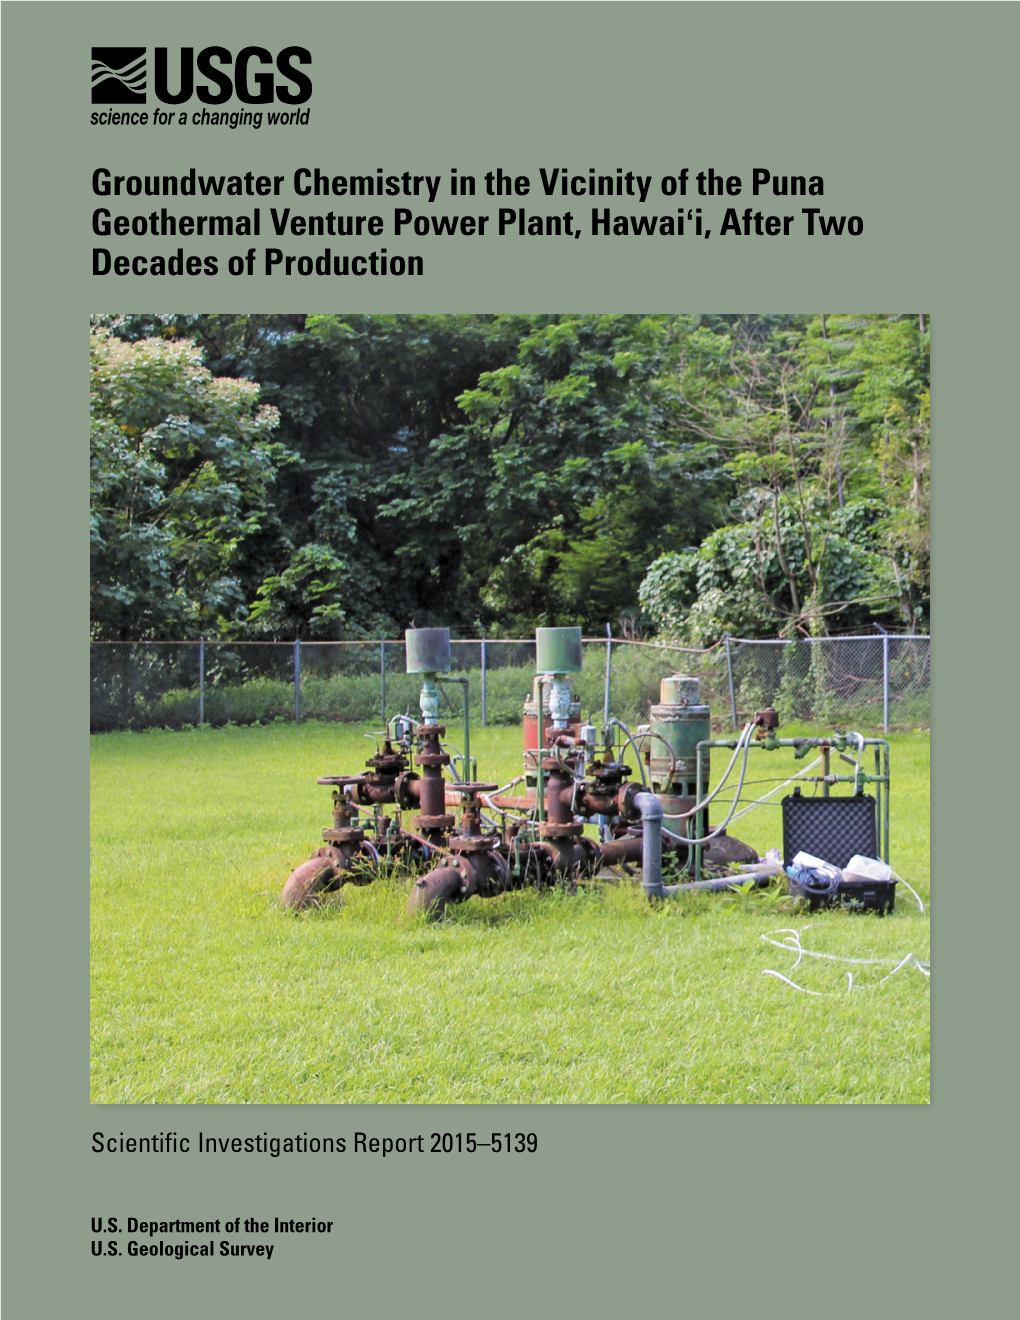 Groundwater Chemistry in the Vicinity of the Puna Geothermal Venture Power Plant, Hawai‘I, After Two Decades of Production